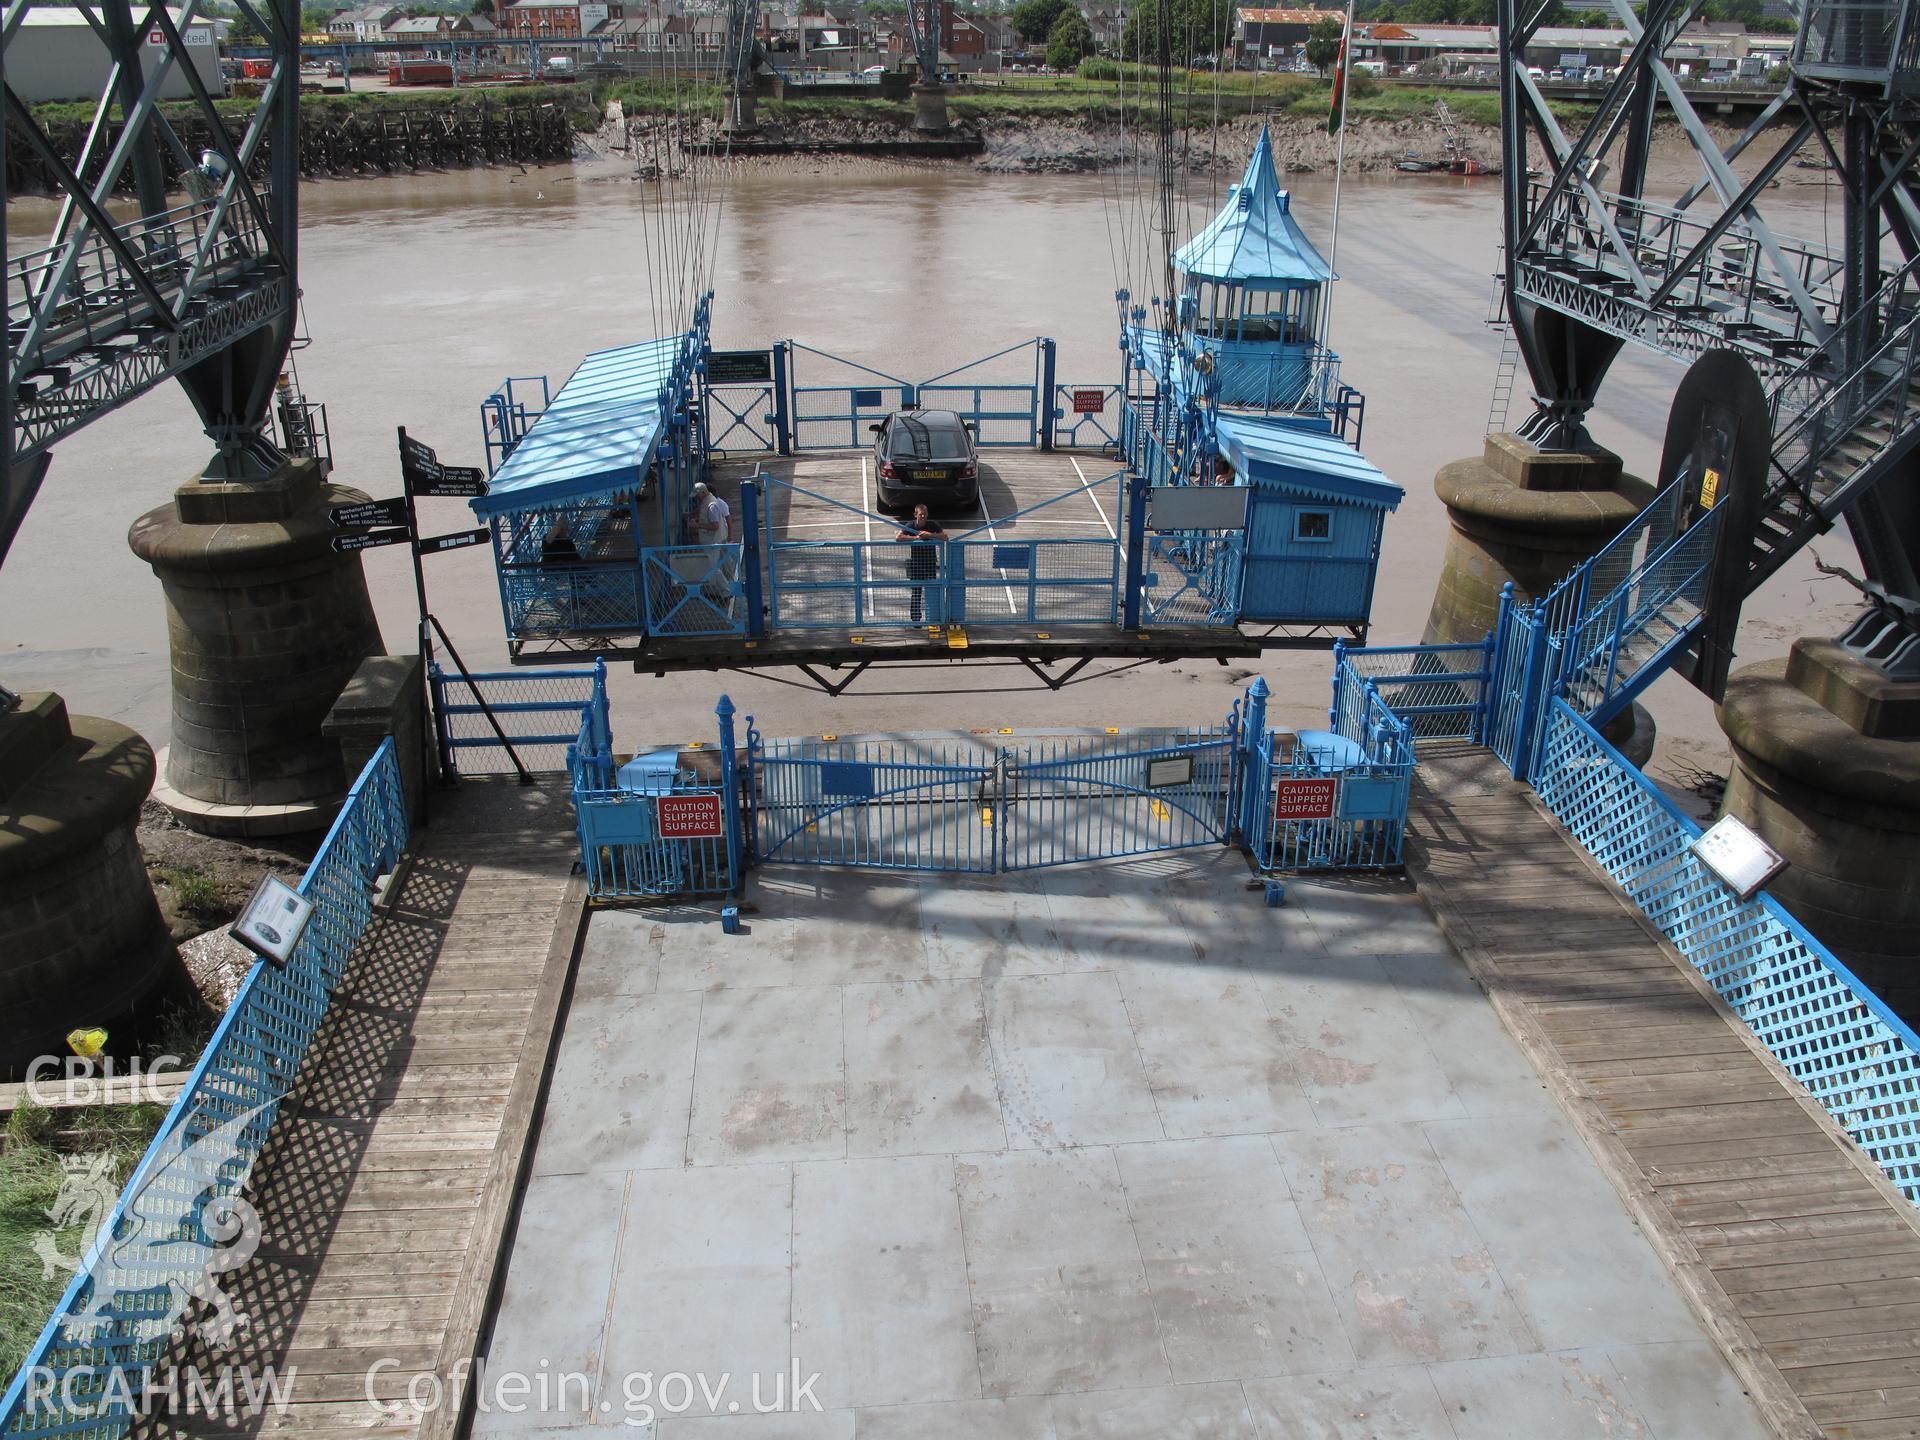 View of the gondola from the southeast, Newport Transporter Bridge.